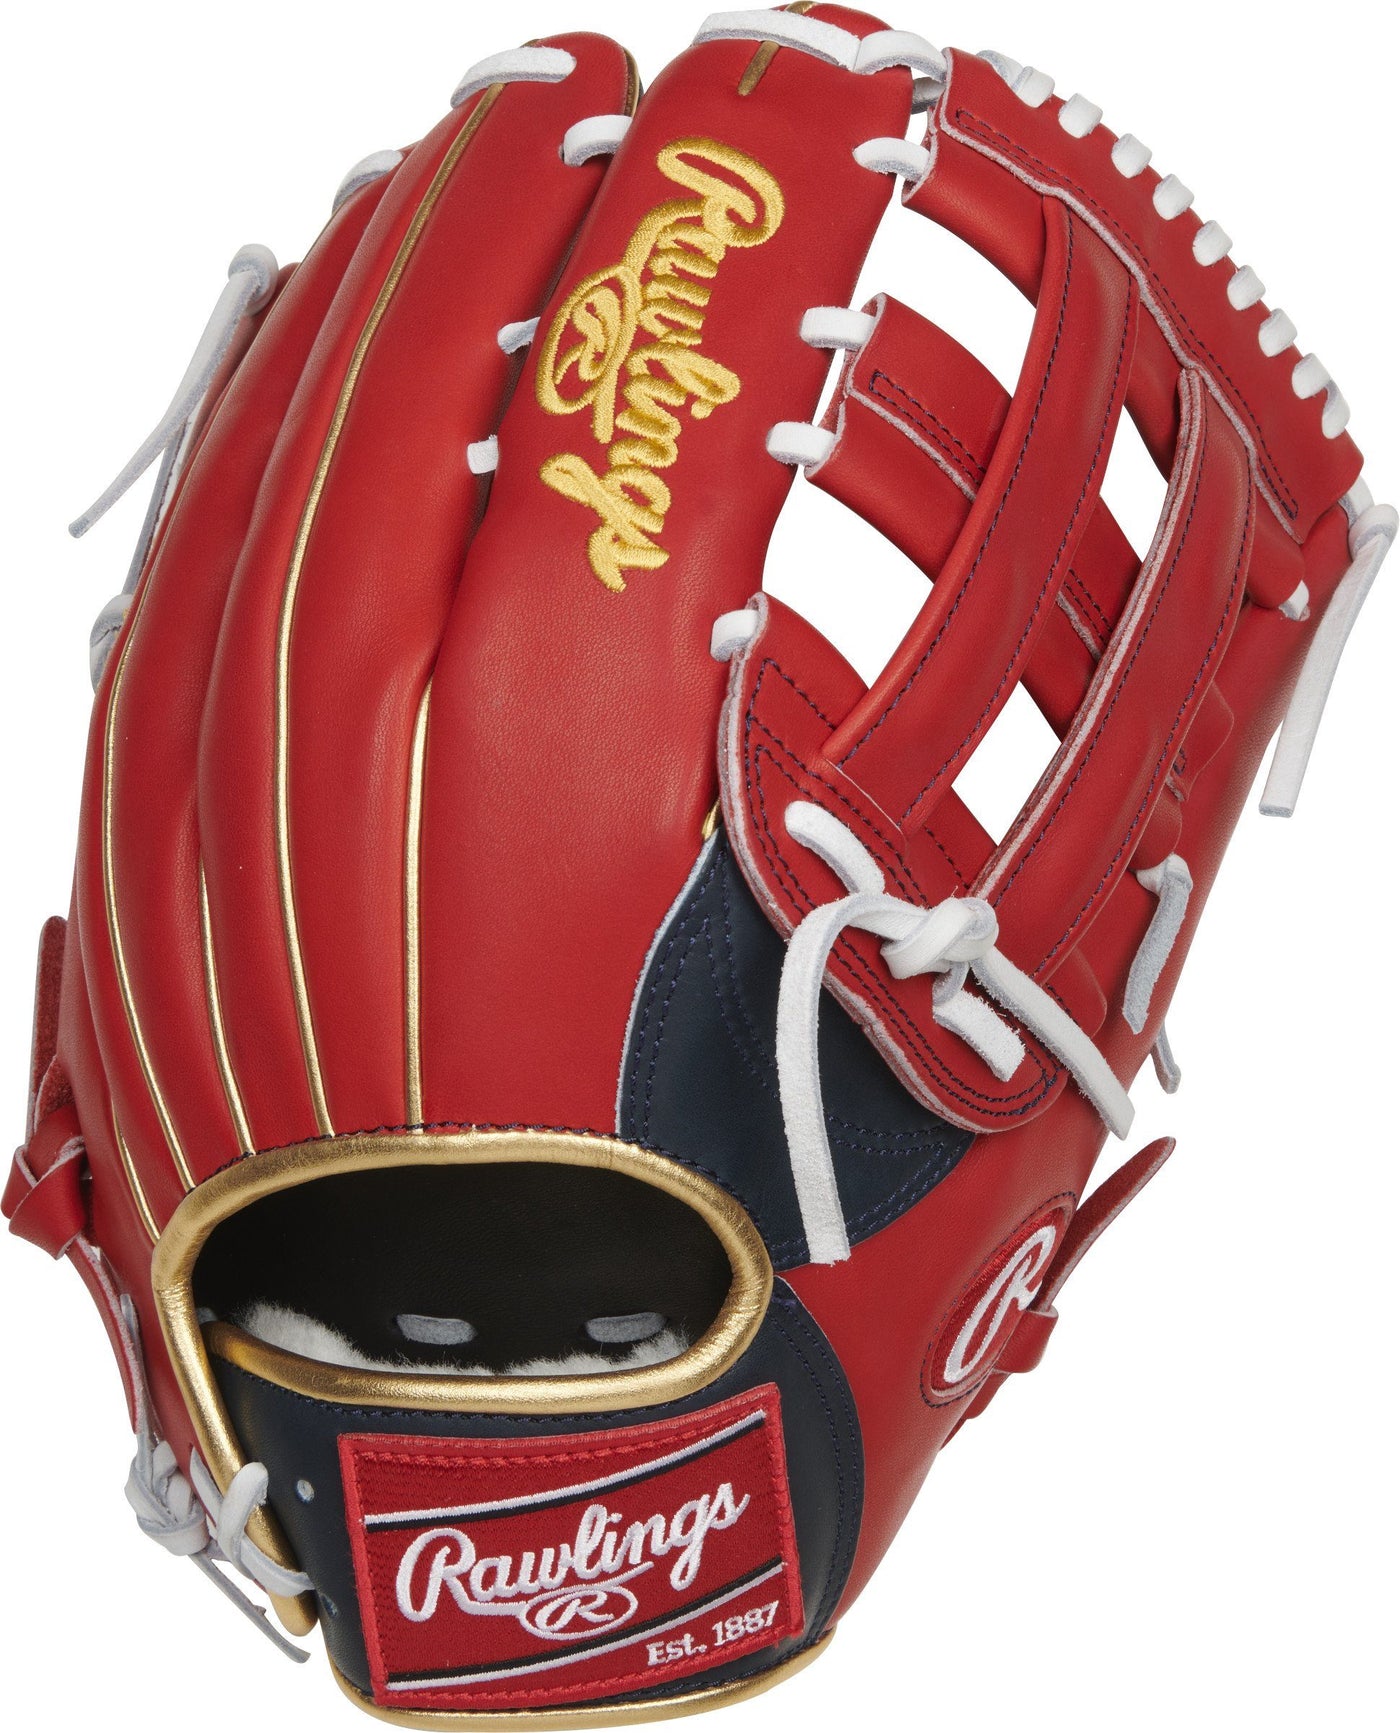  Rawlings Pro Preferred Baseball Glove, 12.75 inch, Pro-H Web,  Left Hand Throw : Sports & Outdoors